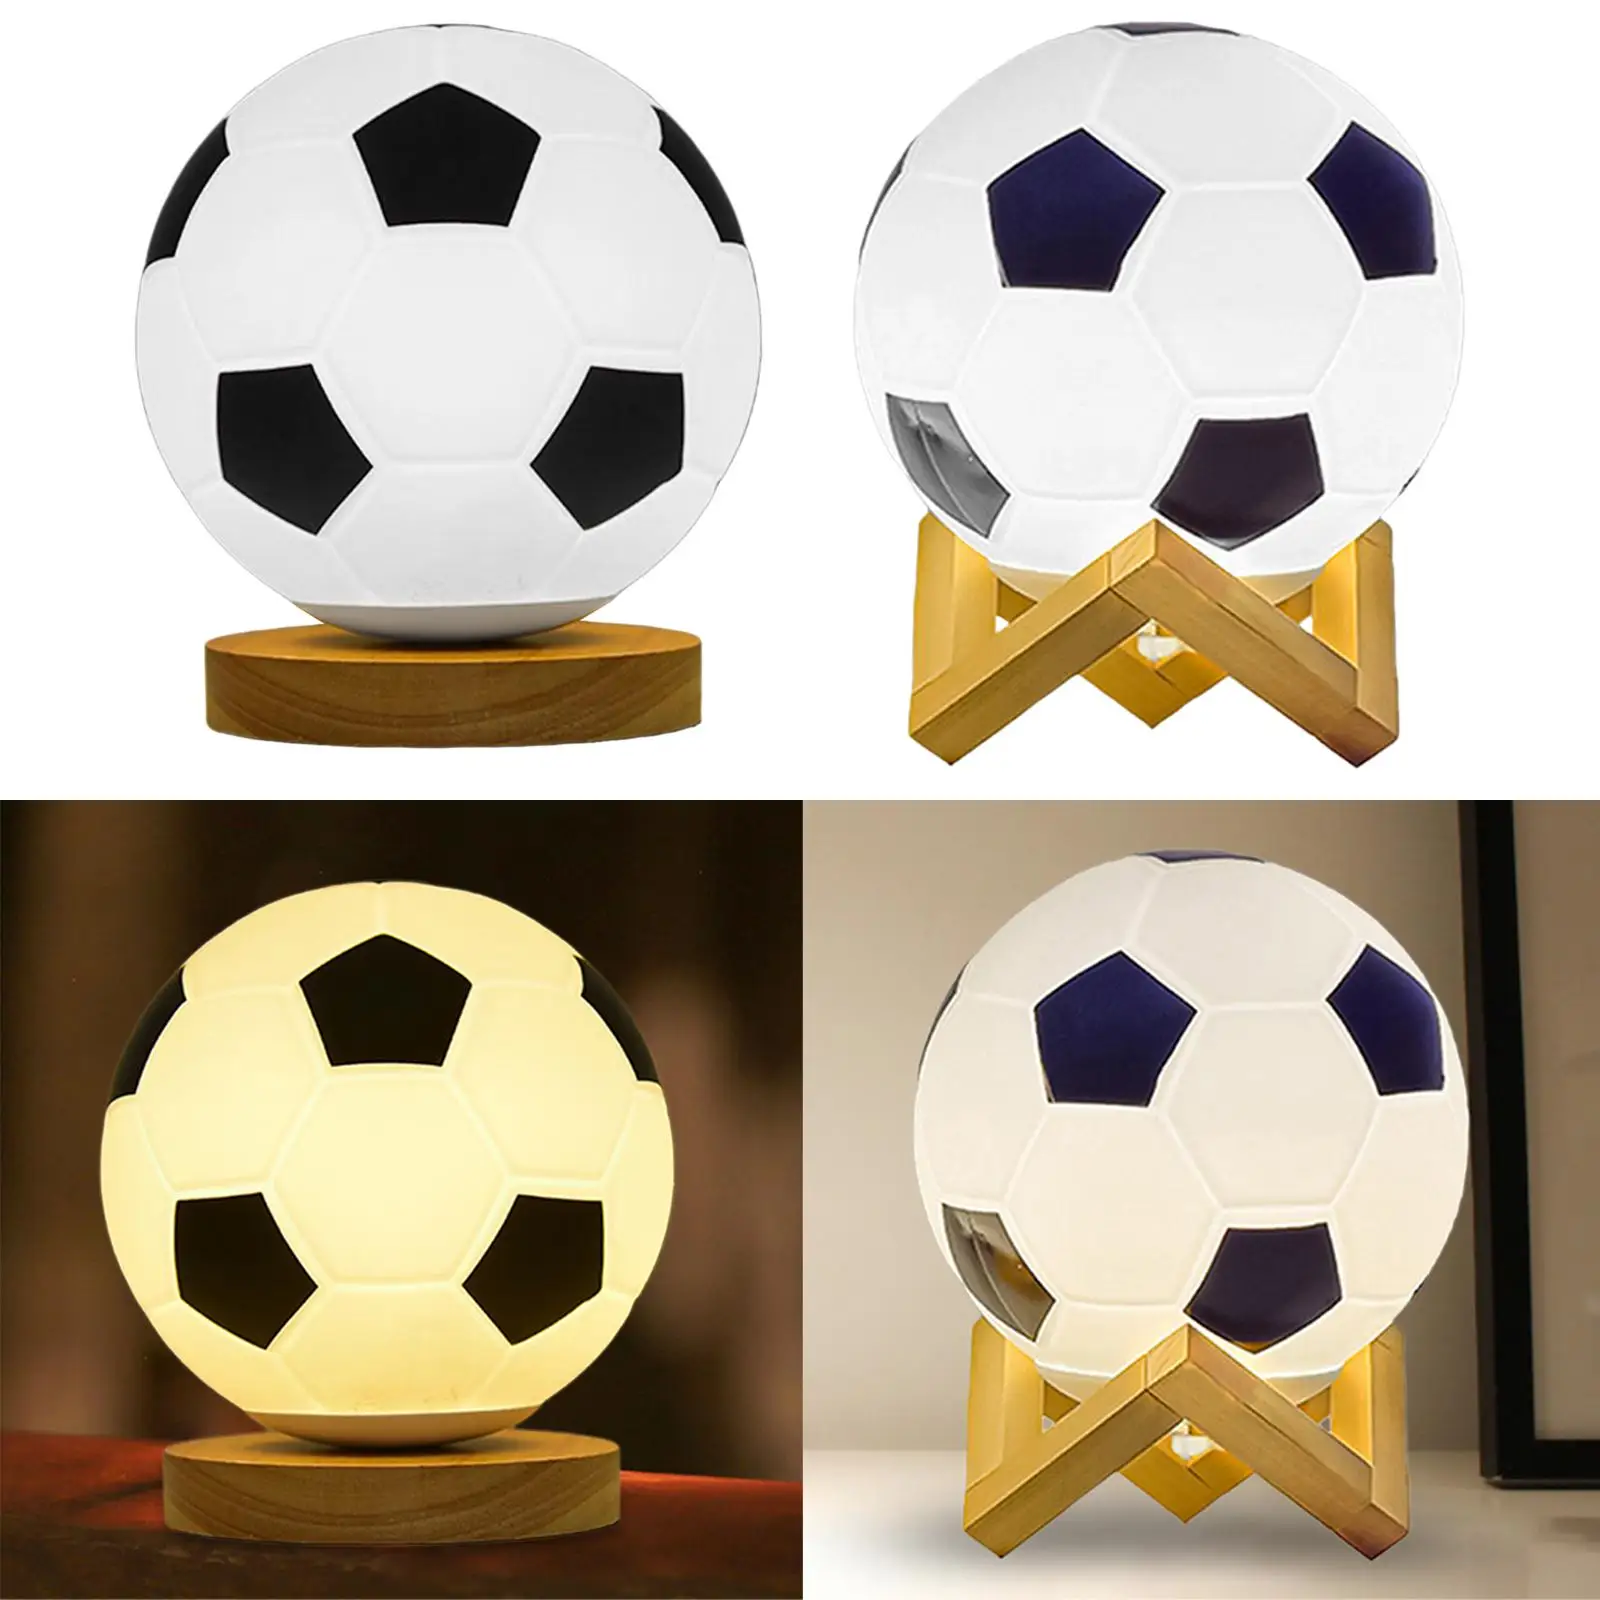 3D Soccer Lamp Dimming Table Lamp USB Powered Warm White LED